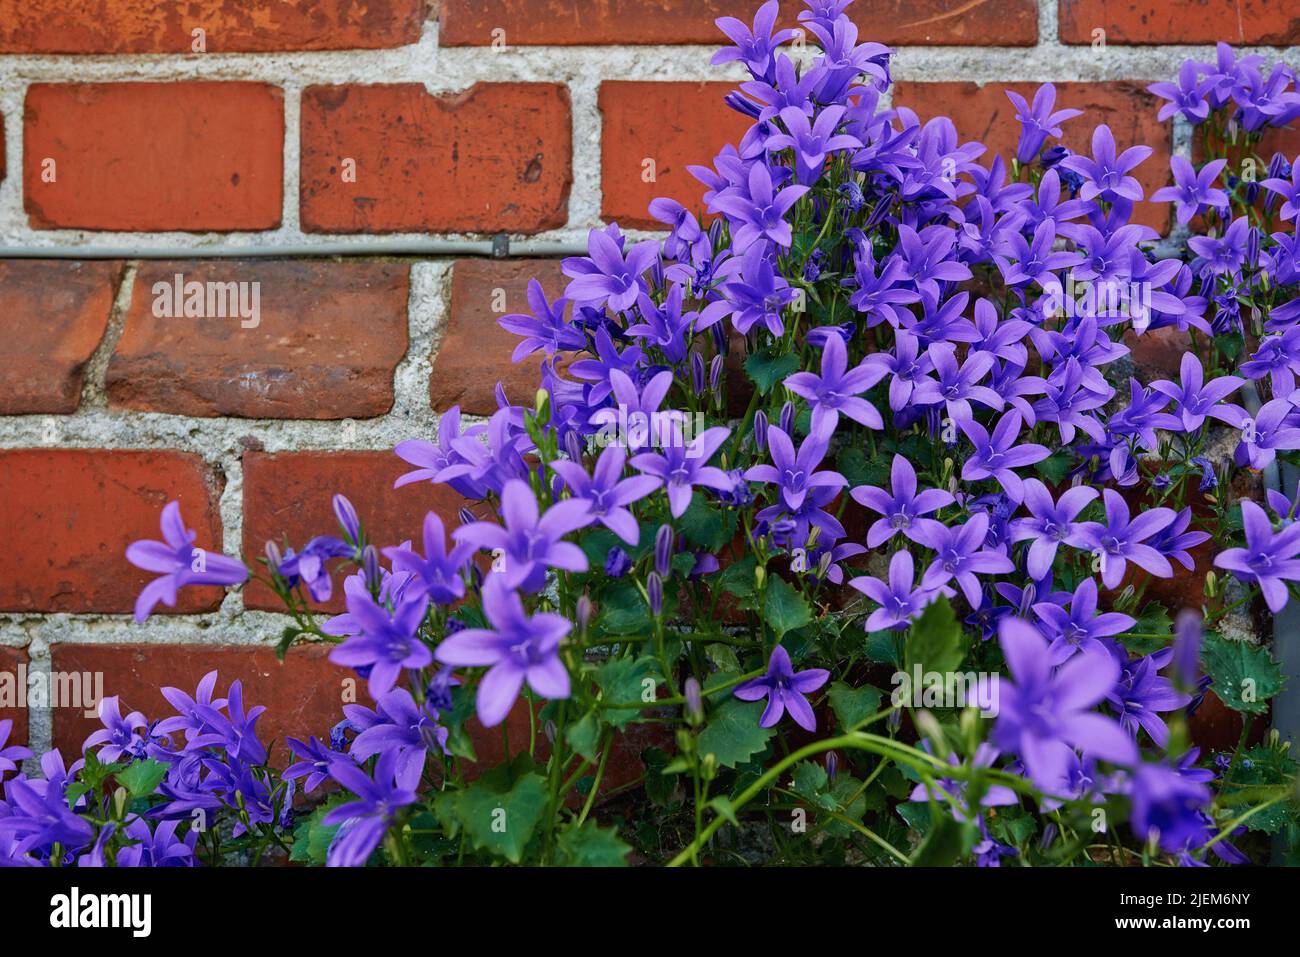 Bunch of purple bellflowers blooming outside against red brick wall. Beautiful floral plants with green leaves growing in a garden or backyard. Many Stock Photo